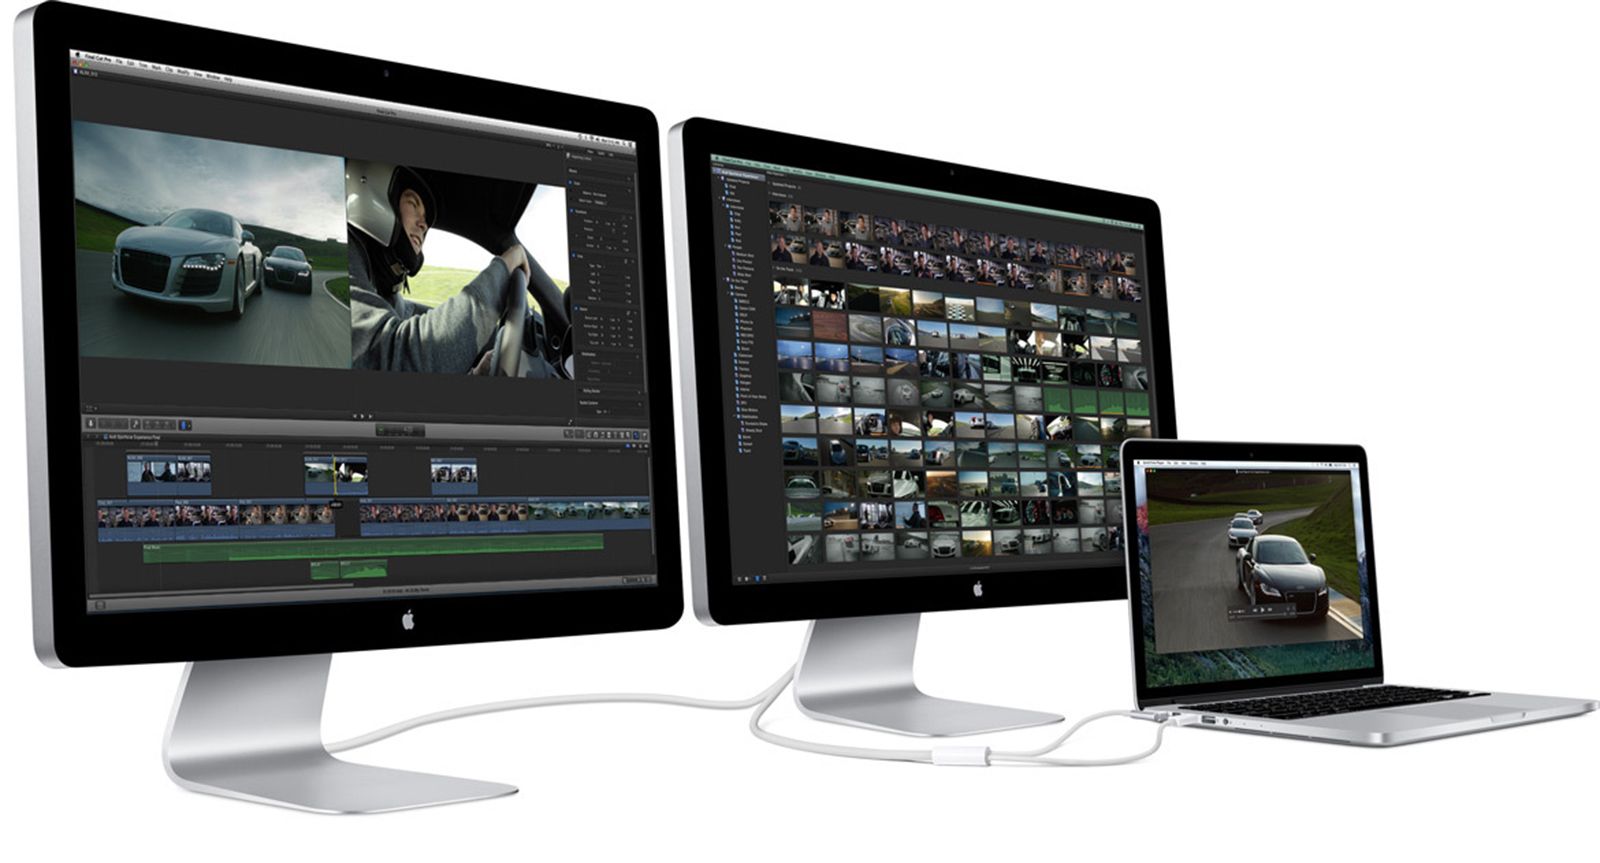 apple 5k thunderbolt display to upgrade your mac with its own gpu image 1